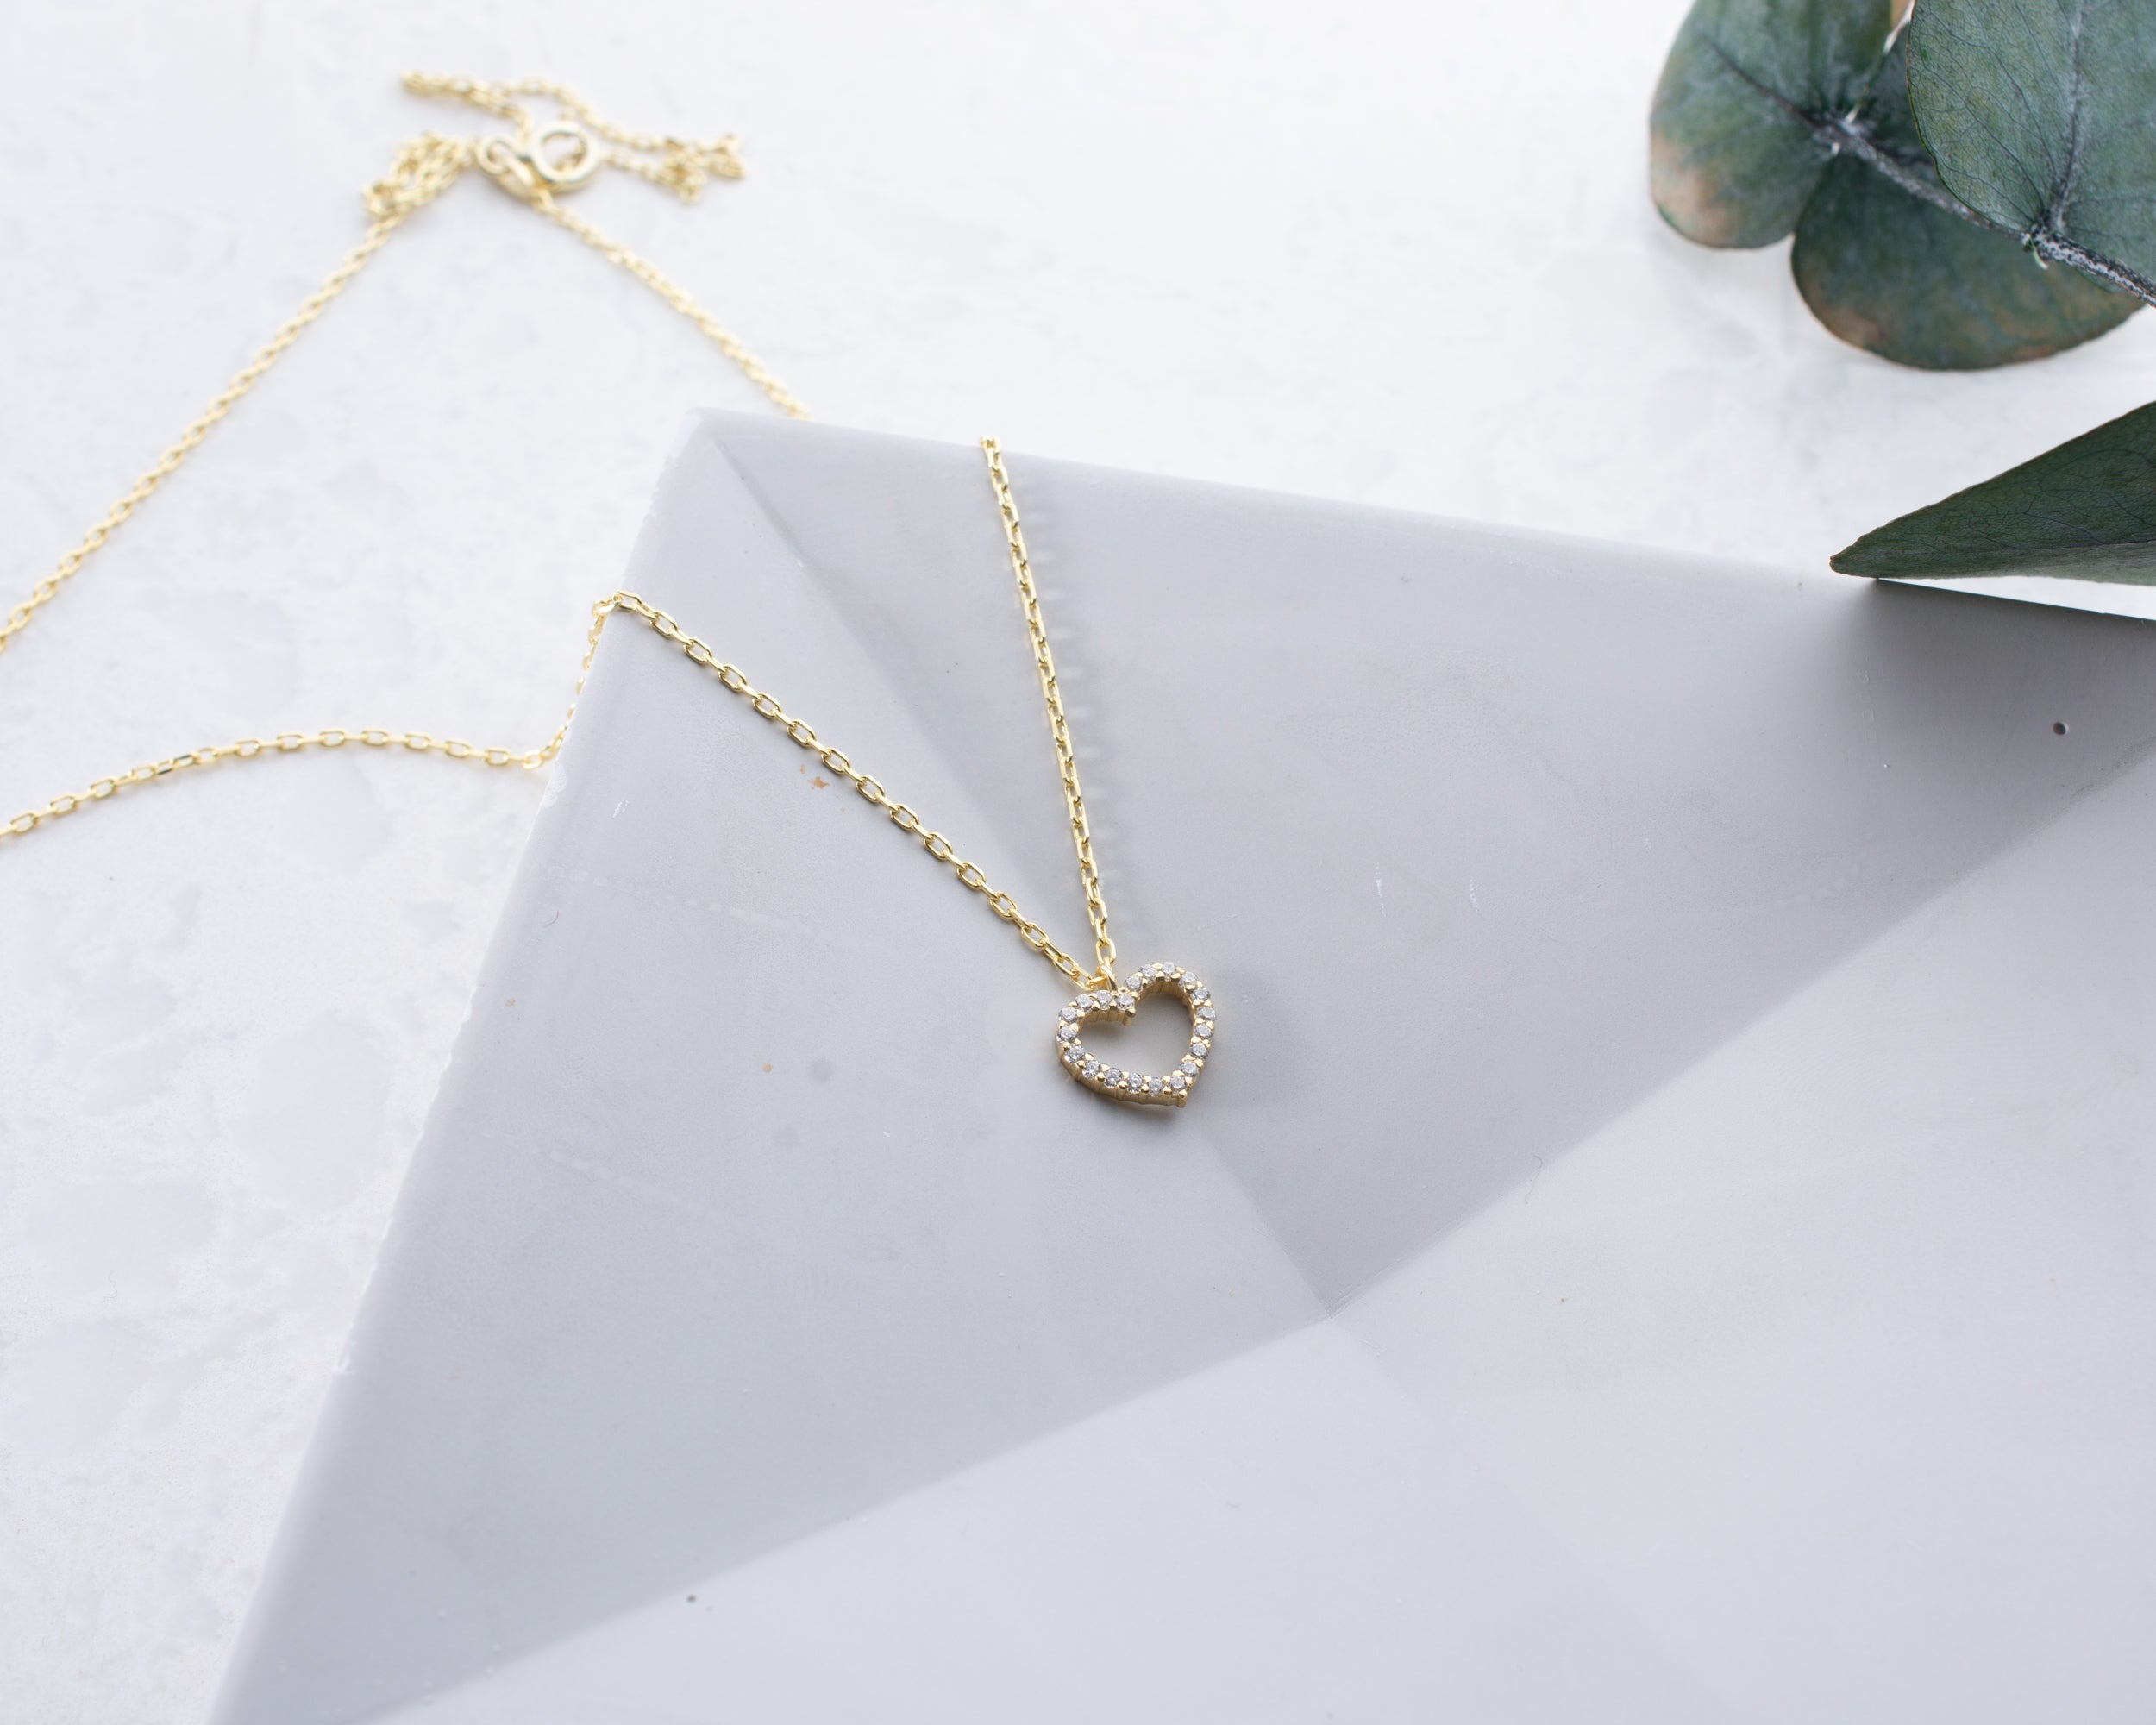 Lovi Heart Necklace in s925 with gold plating | Rozy Jewellery